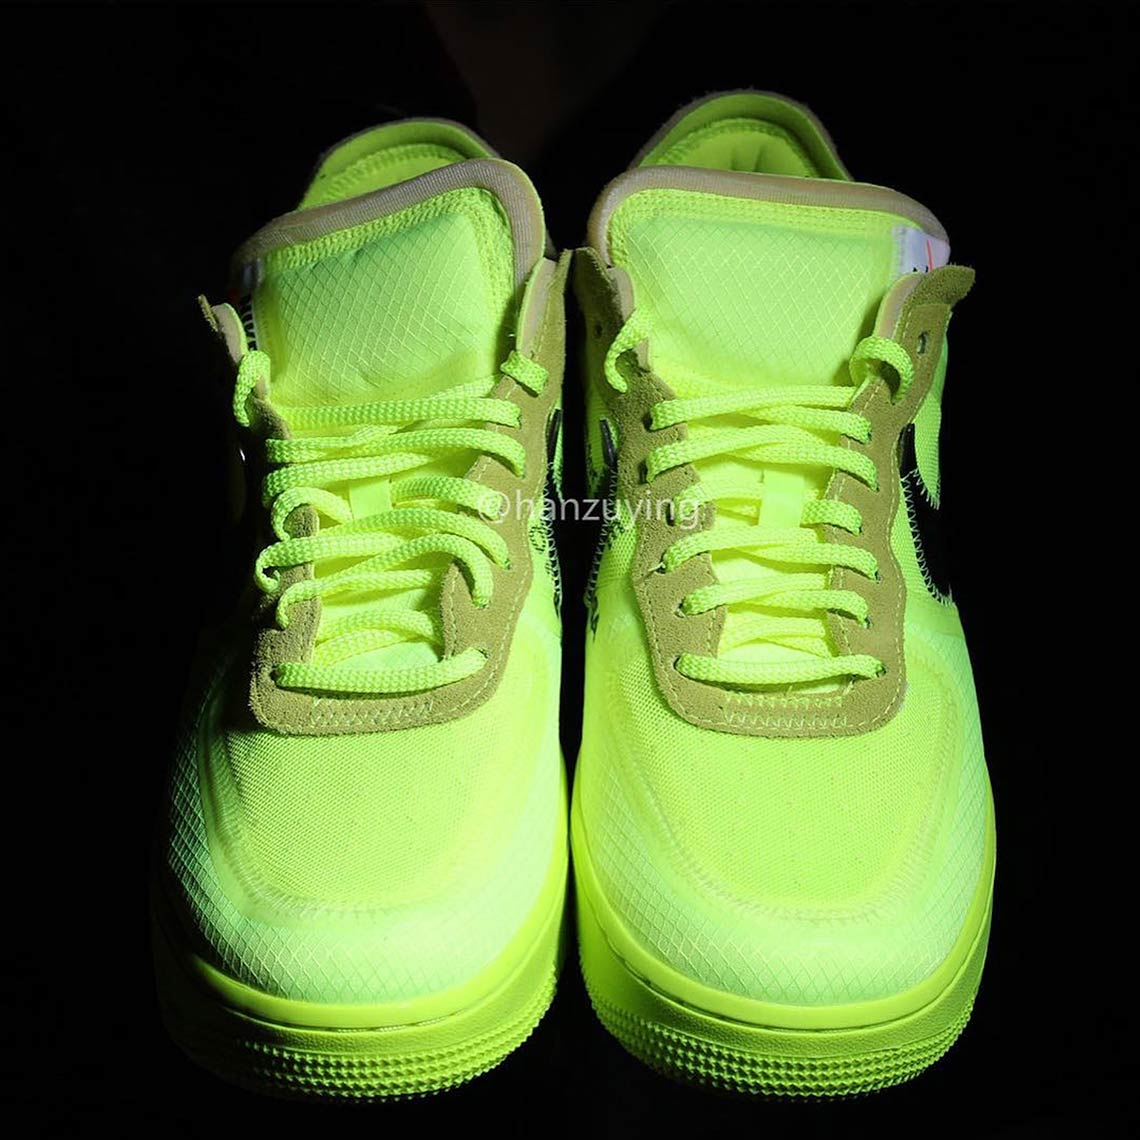 off white nike air force 1 low volt 14